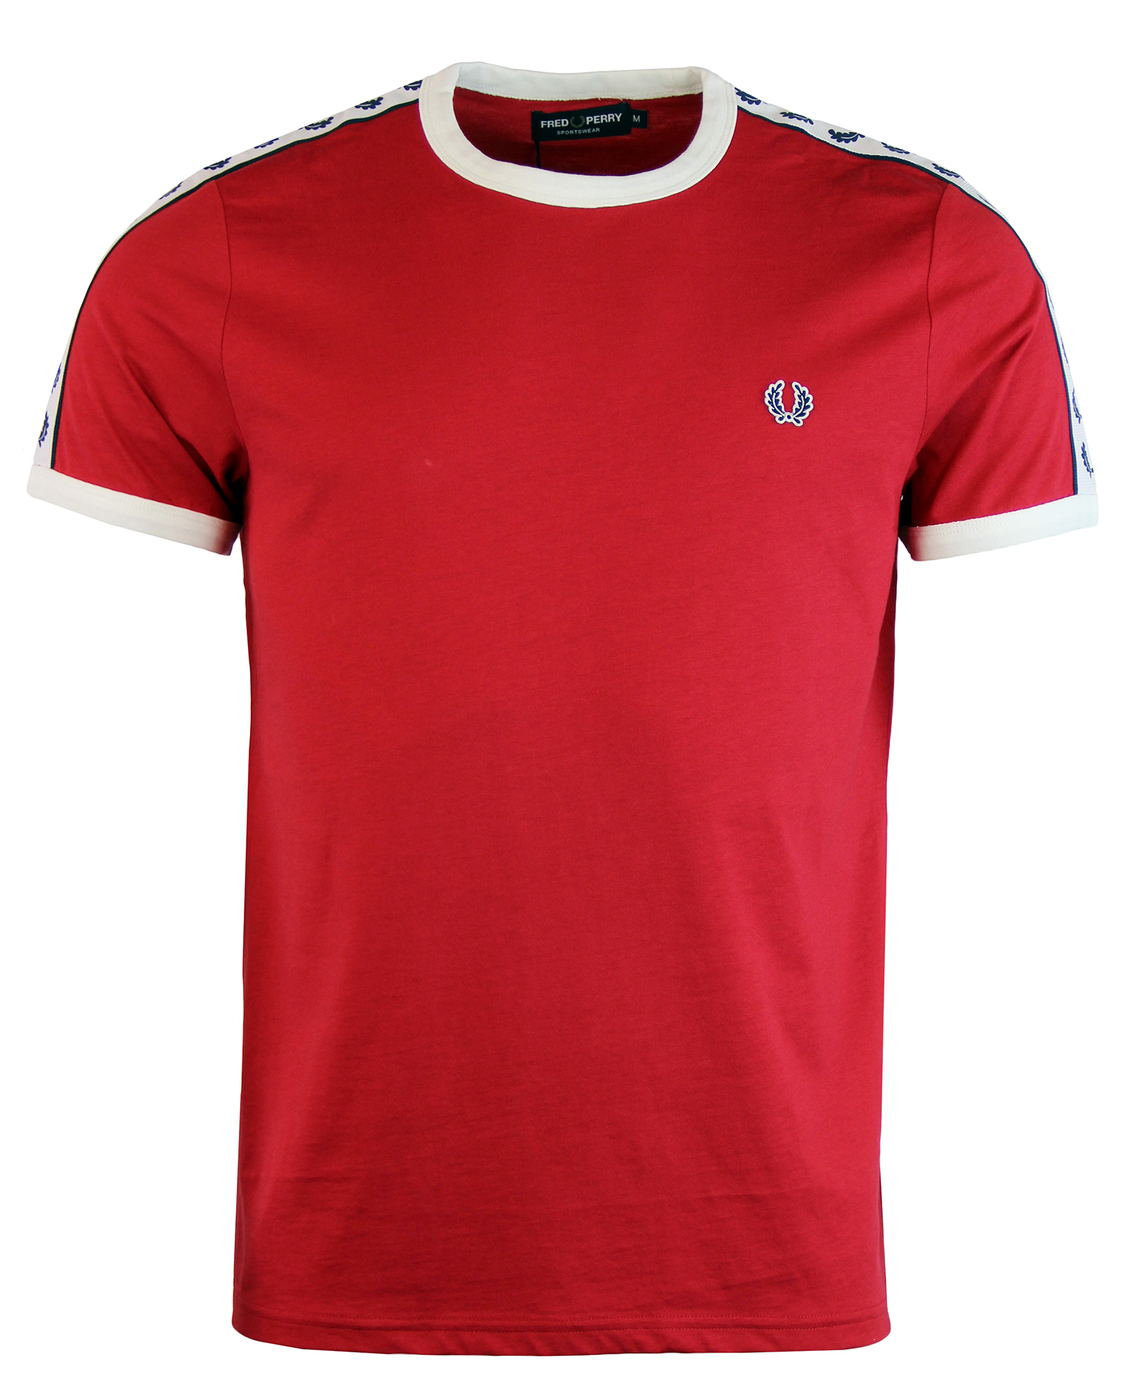 FRED PERRY Men's Retro Taped Sleeve Ringer Tee RED